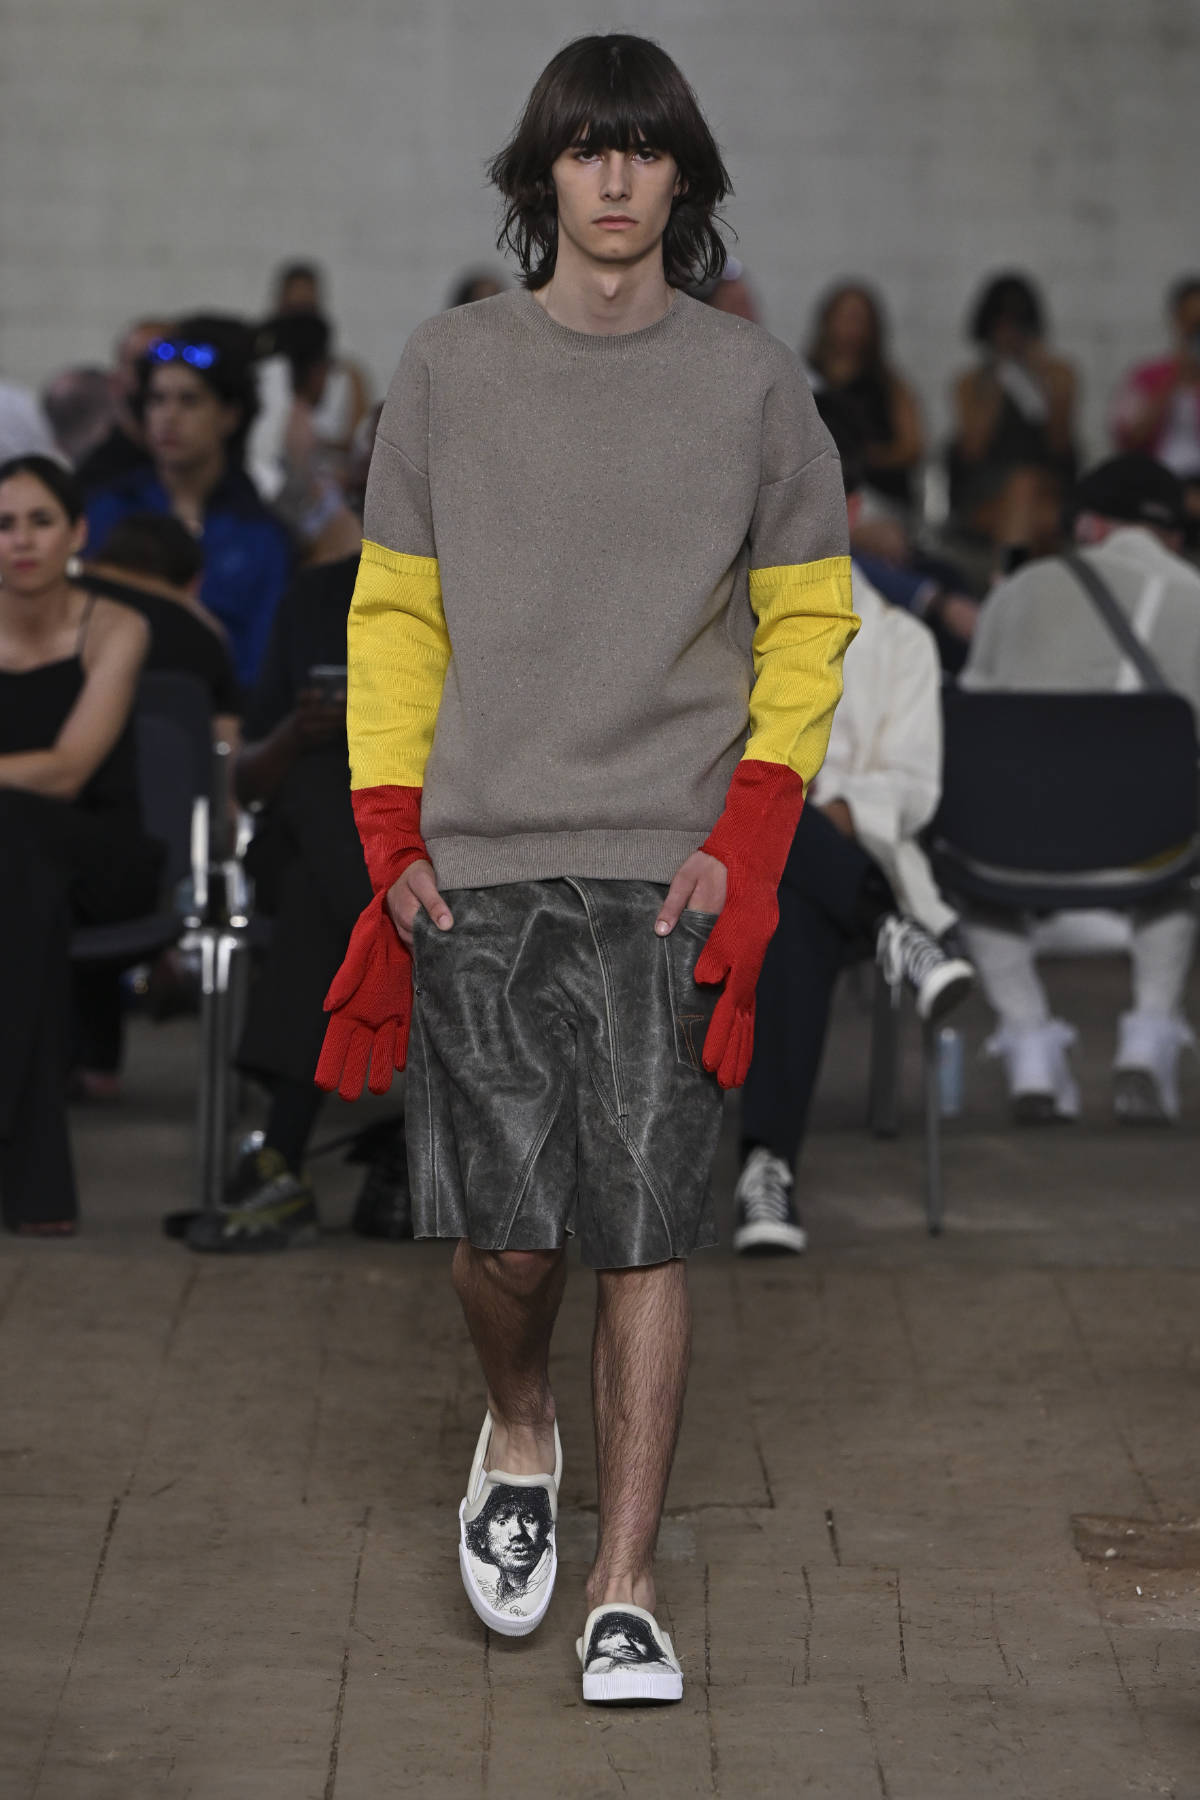 JW Anderson Presents Its New Men’s Spring Summer 2023 And Women’s Resort 23